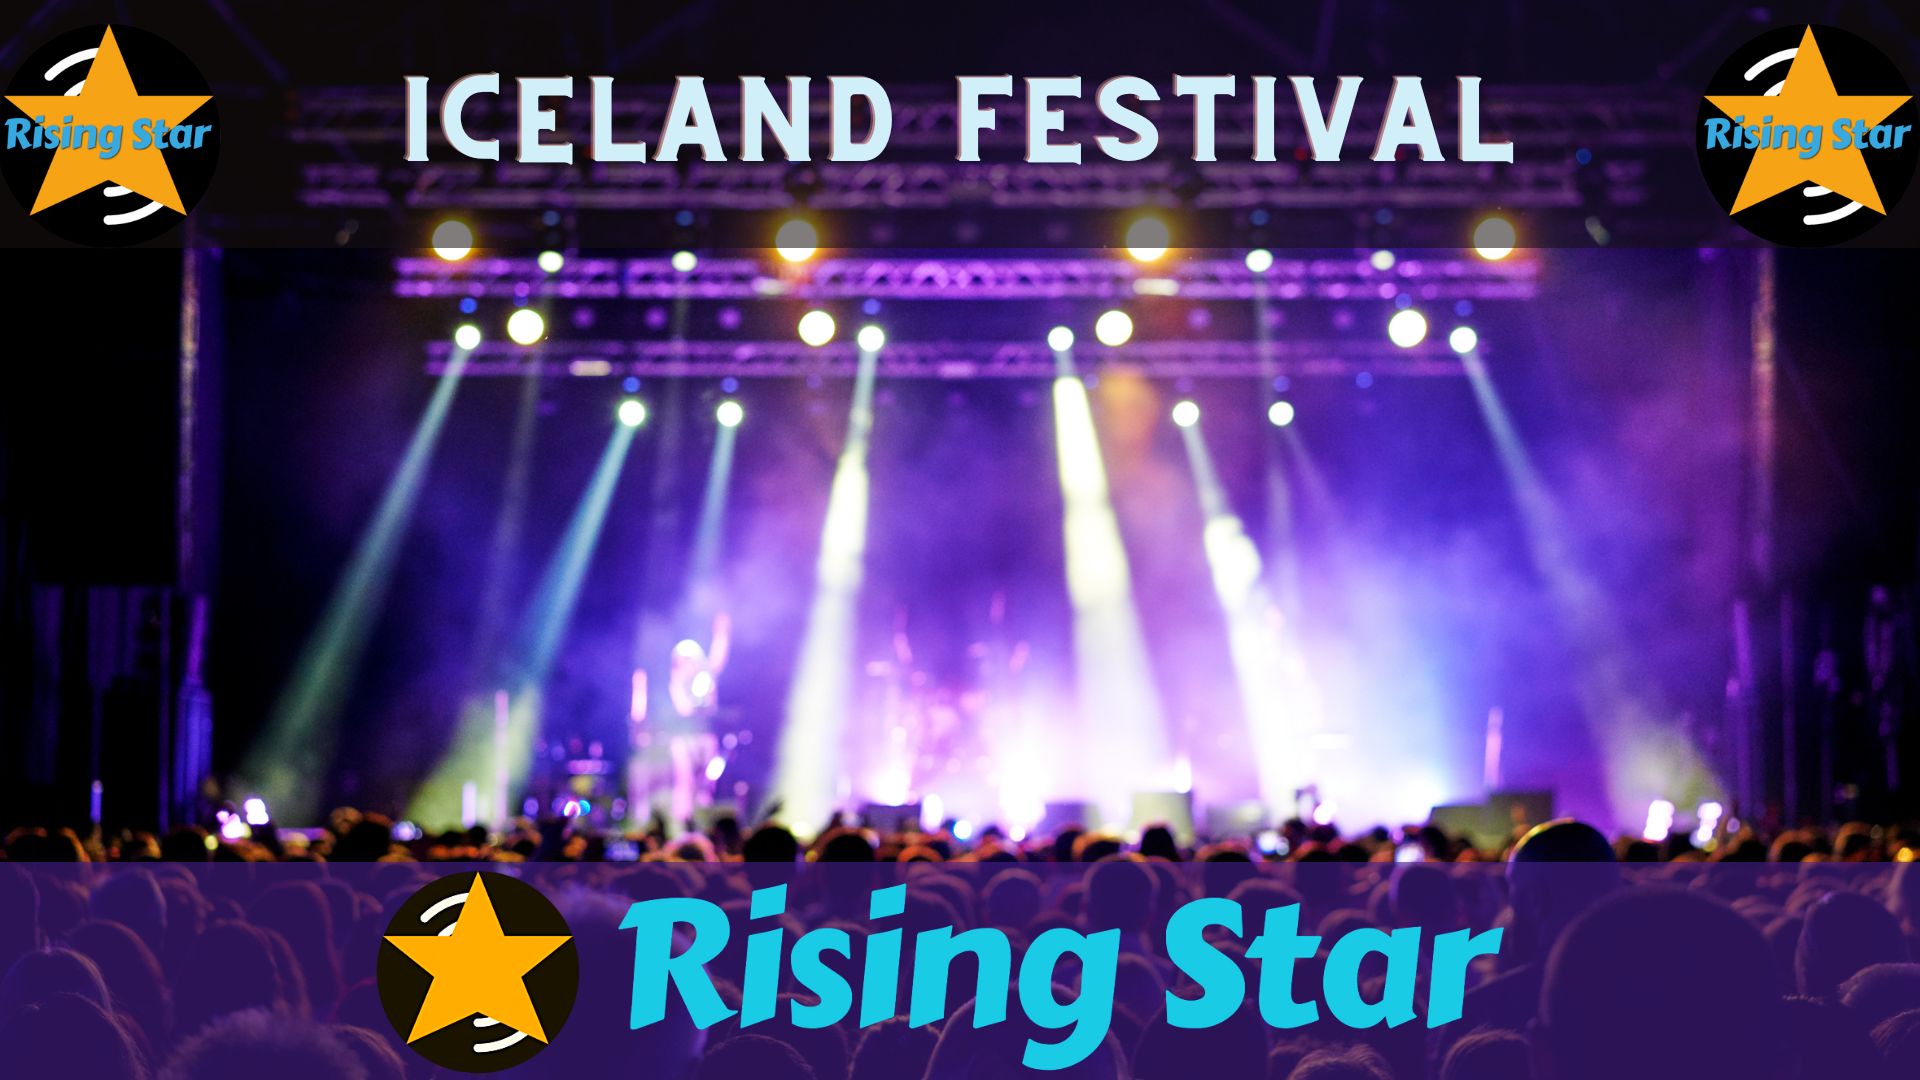 @cryptofiloz/iceland-festival-rising-star-news-game-progress-packs-opening-and-giveaway-95-win-nft